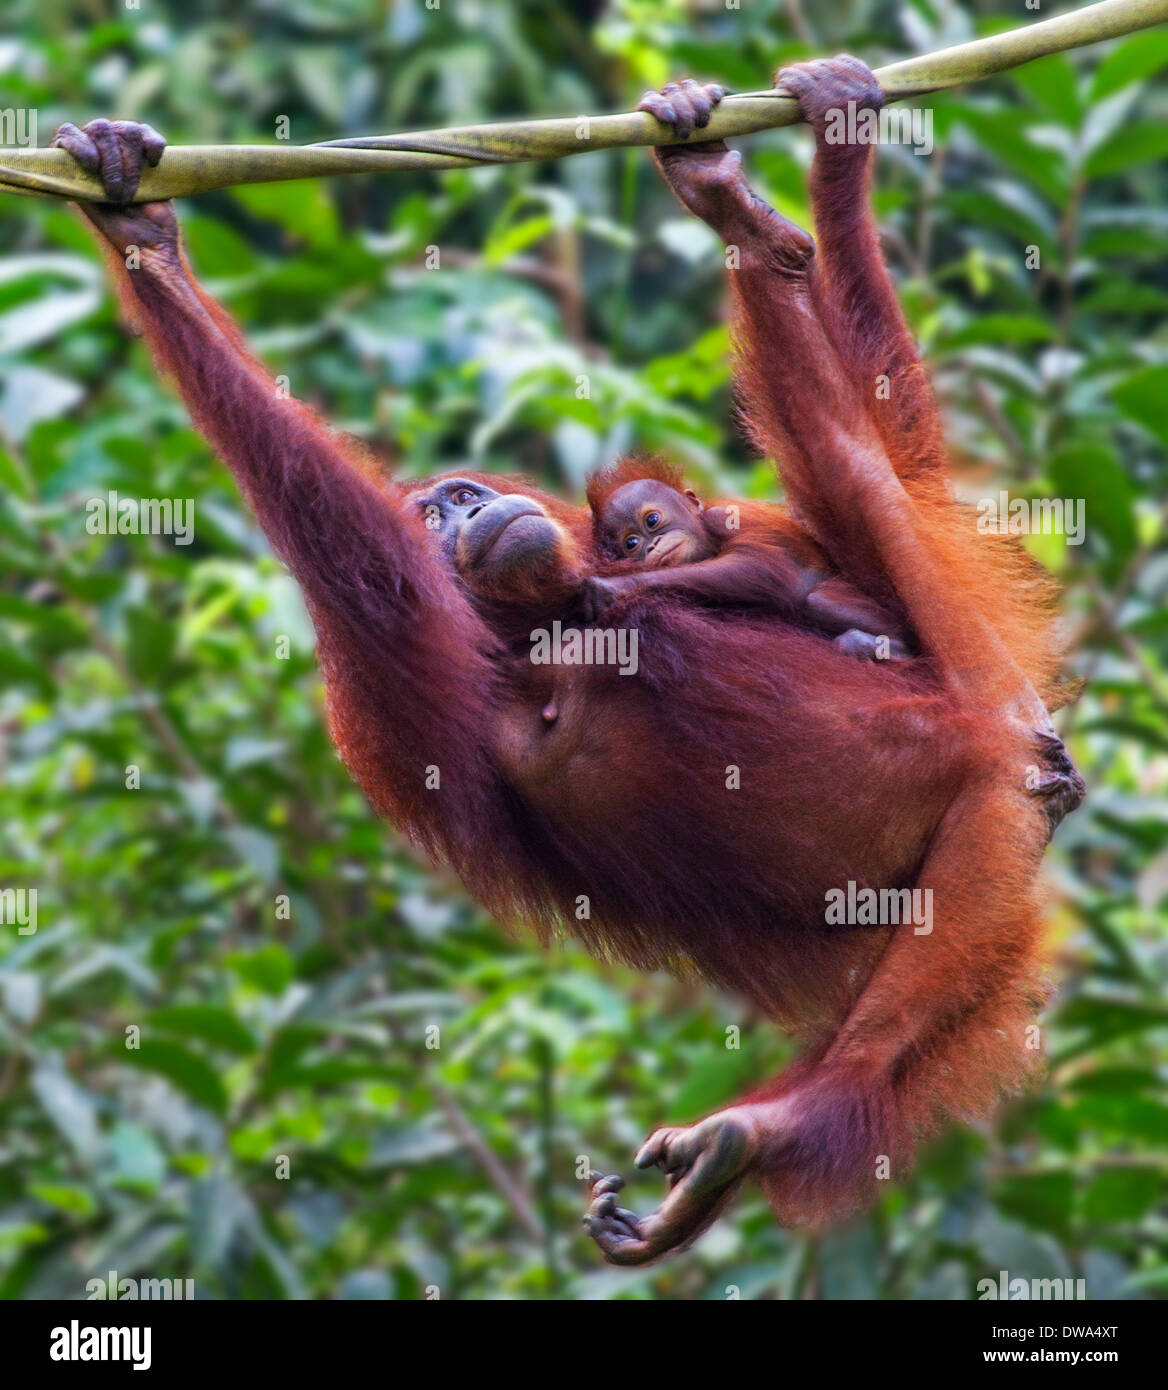 A Mother and Baby Orangutan ( Pongo pygmaeus ) Hanging on a Rope in Borneo, Malaysia Stock Photo